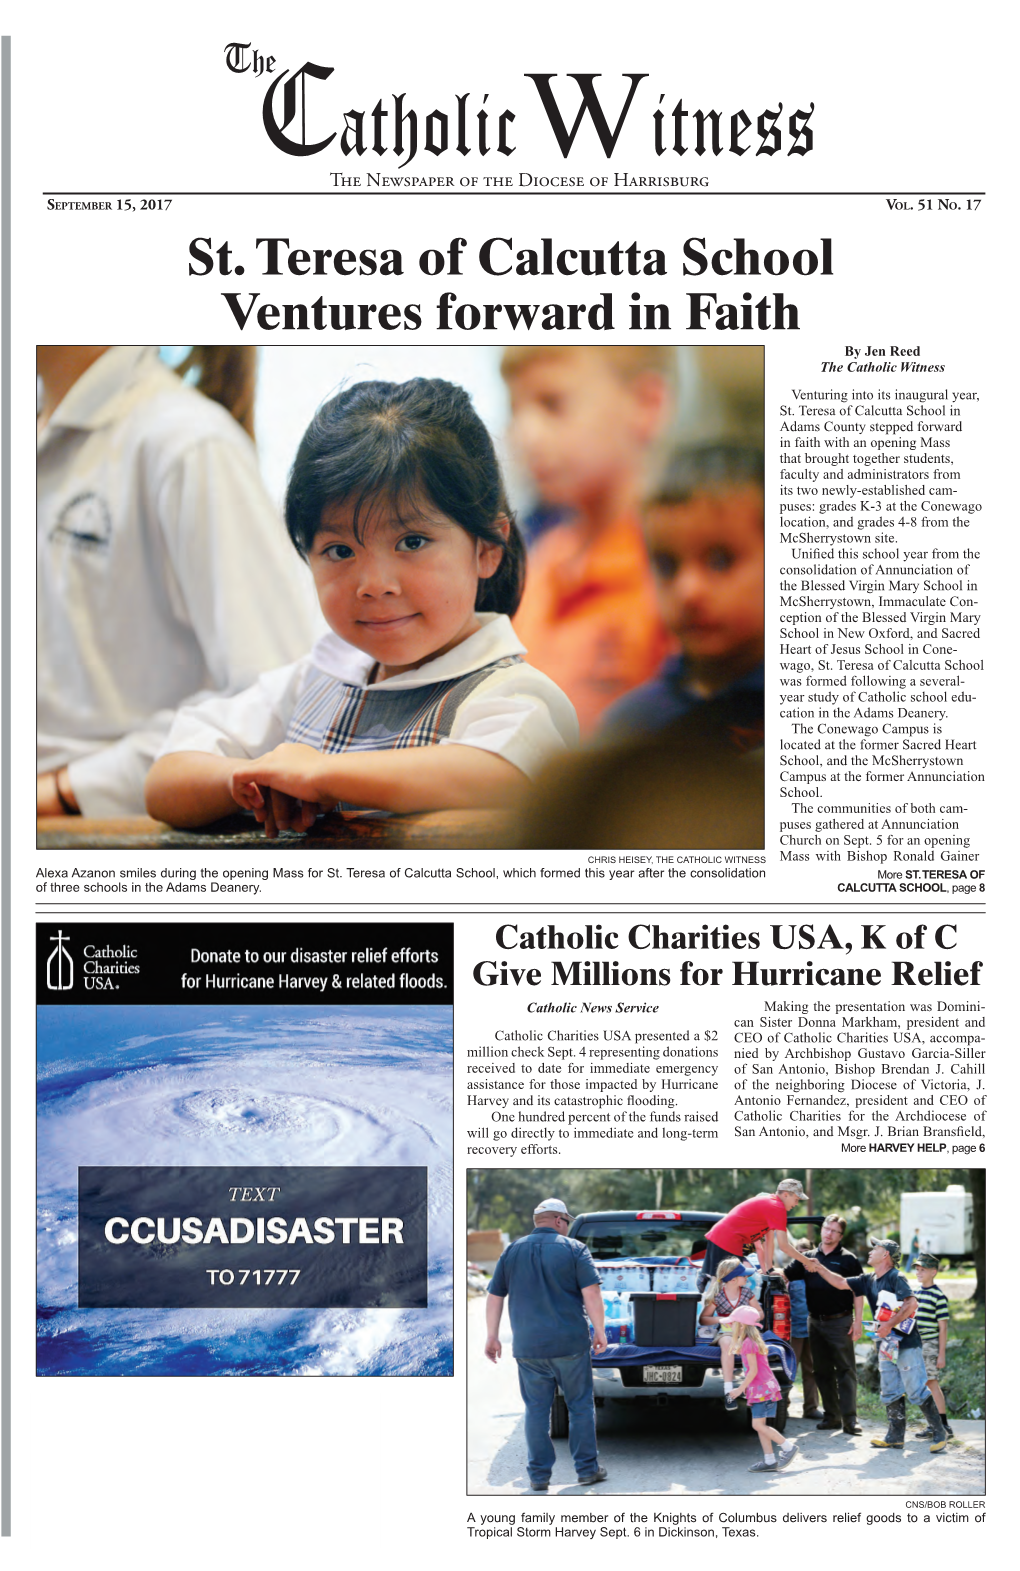 St. Teresa of Calcutta School Ventures Forward in Faith by Jen Reed the Catholic Witness